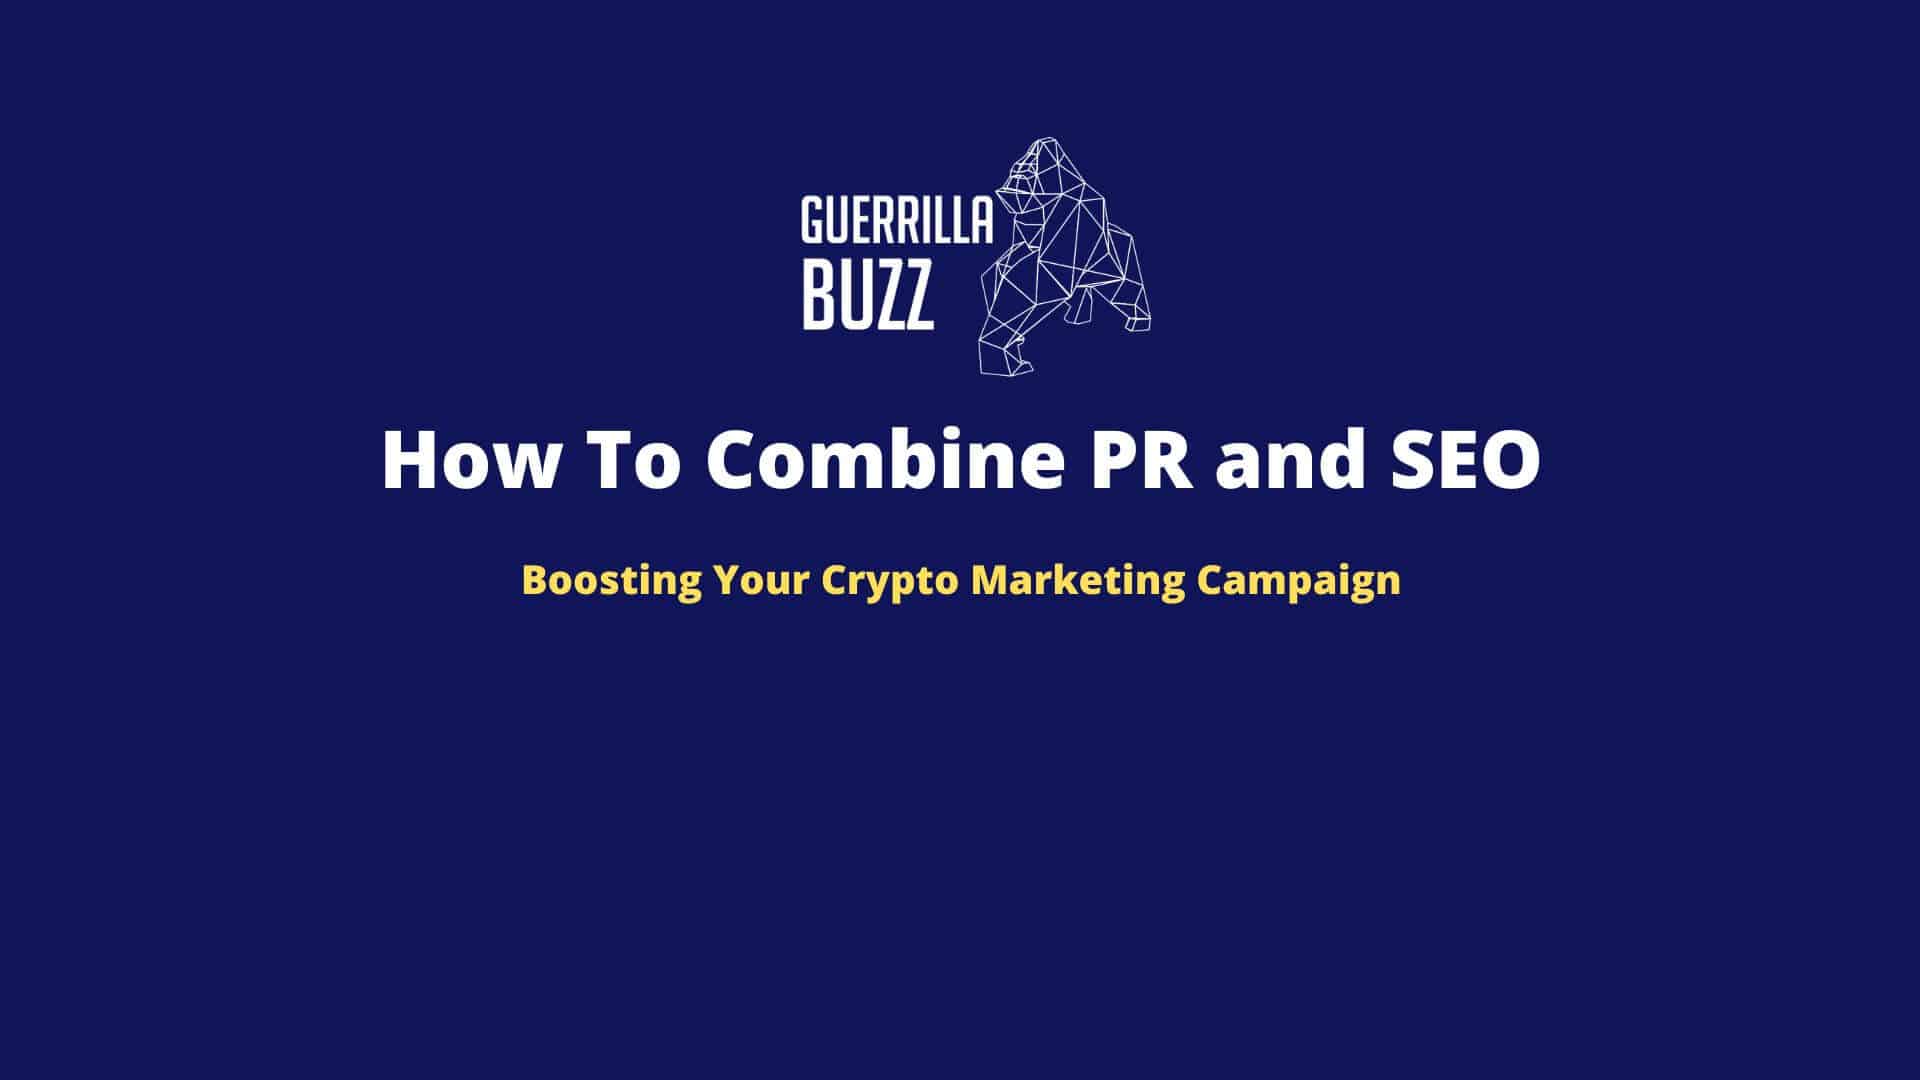 SEO And PR To Boost Crypto Marketing